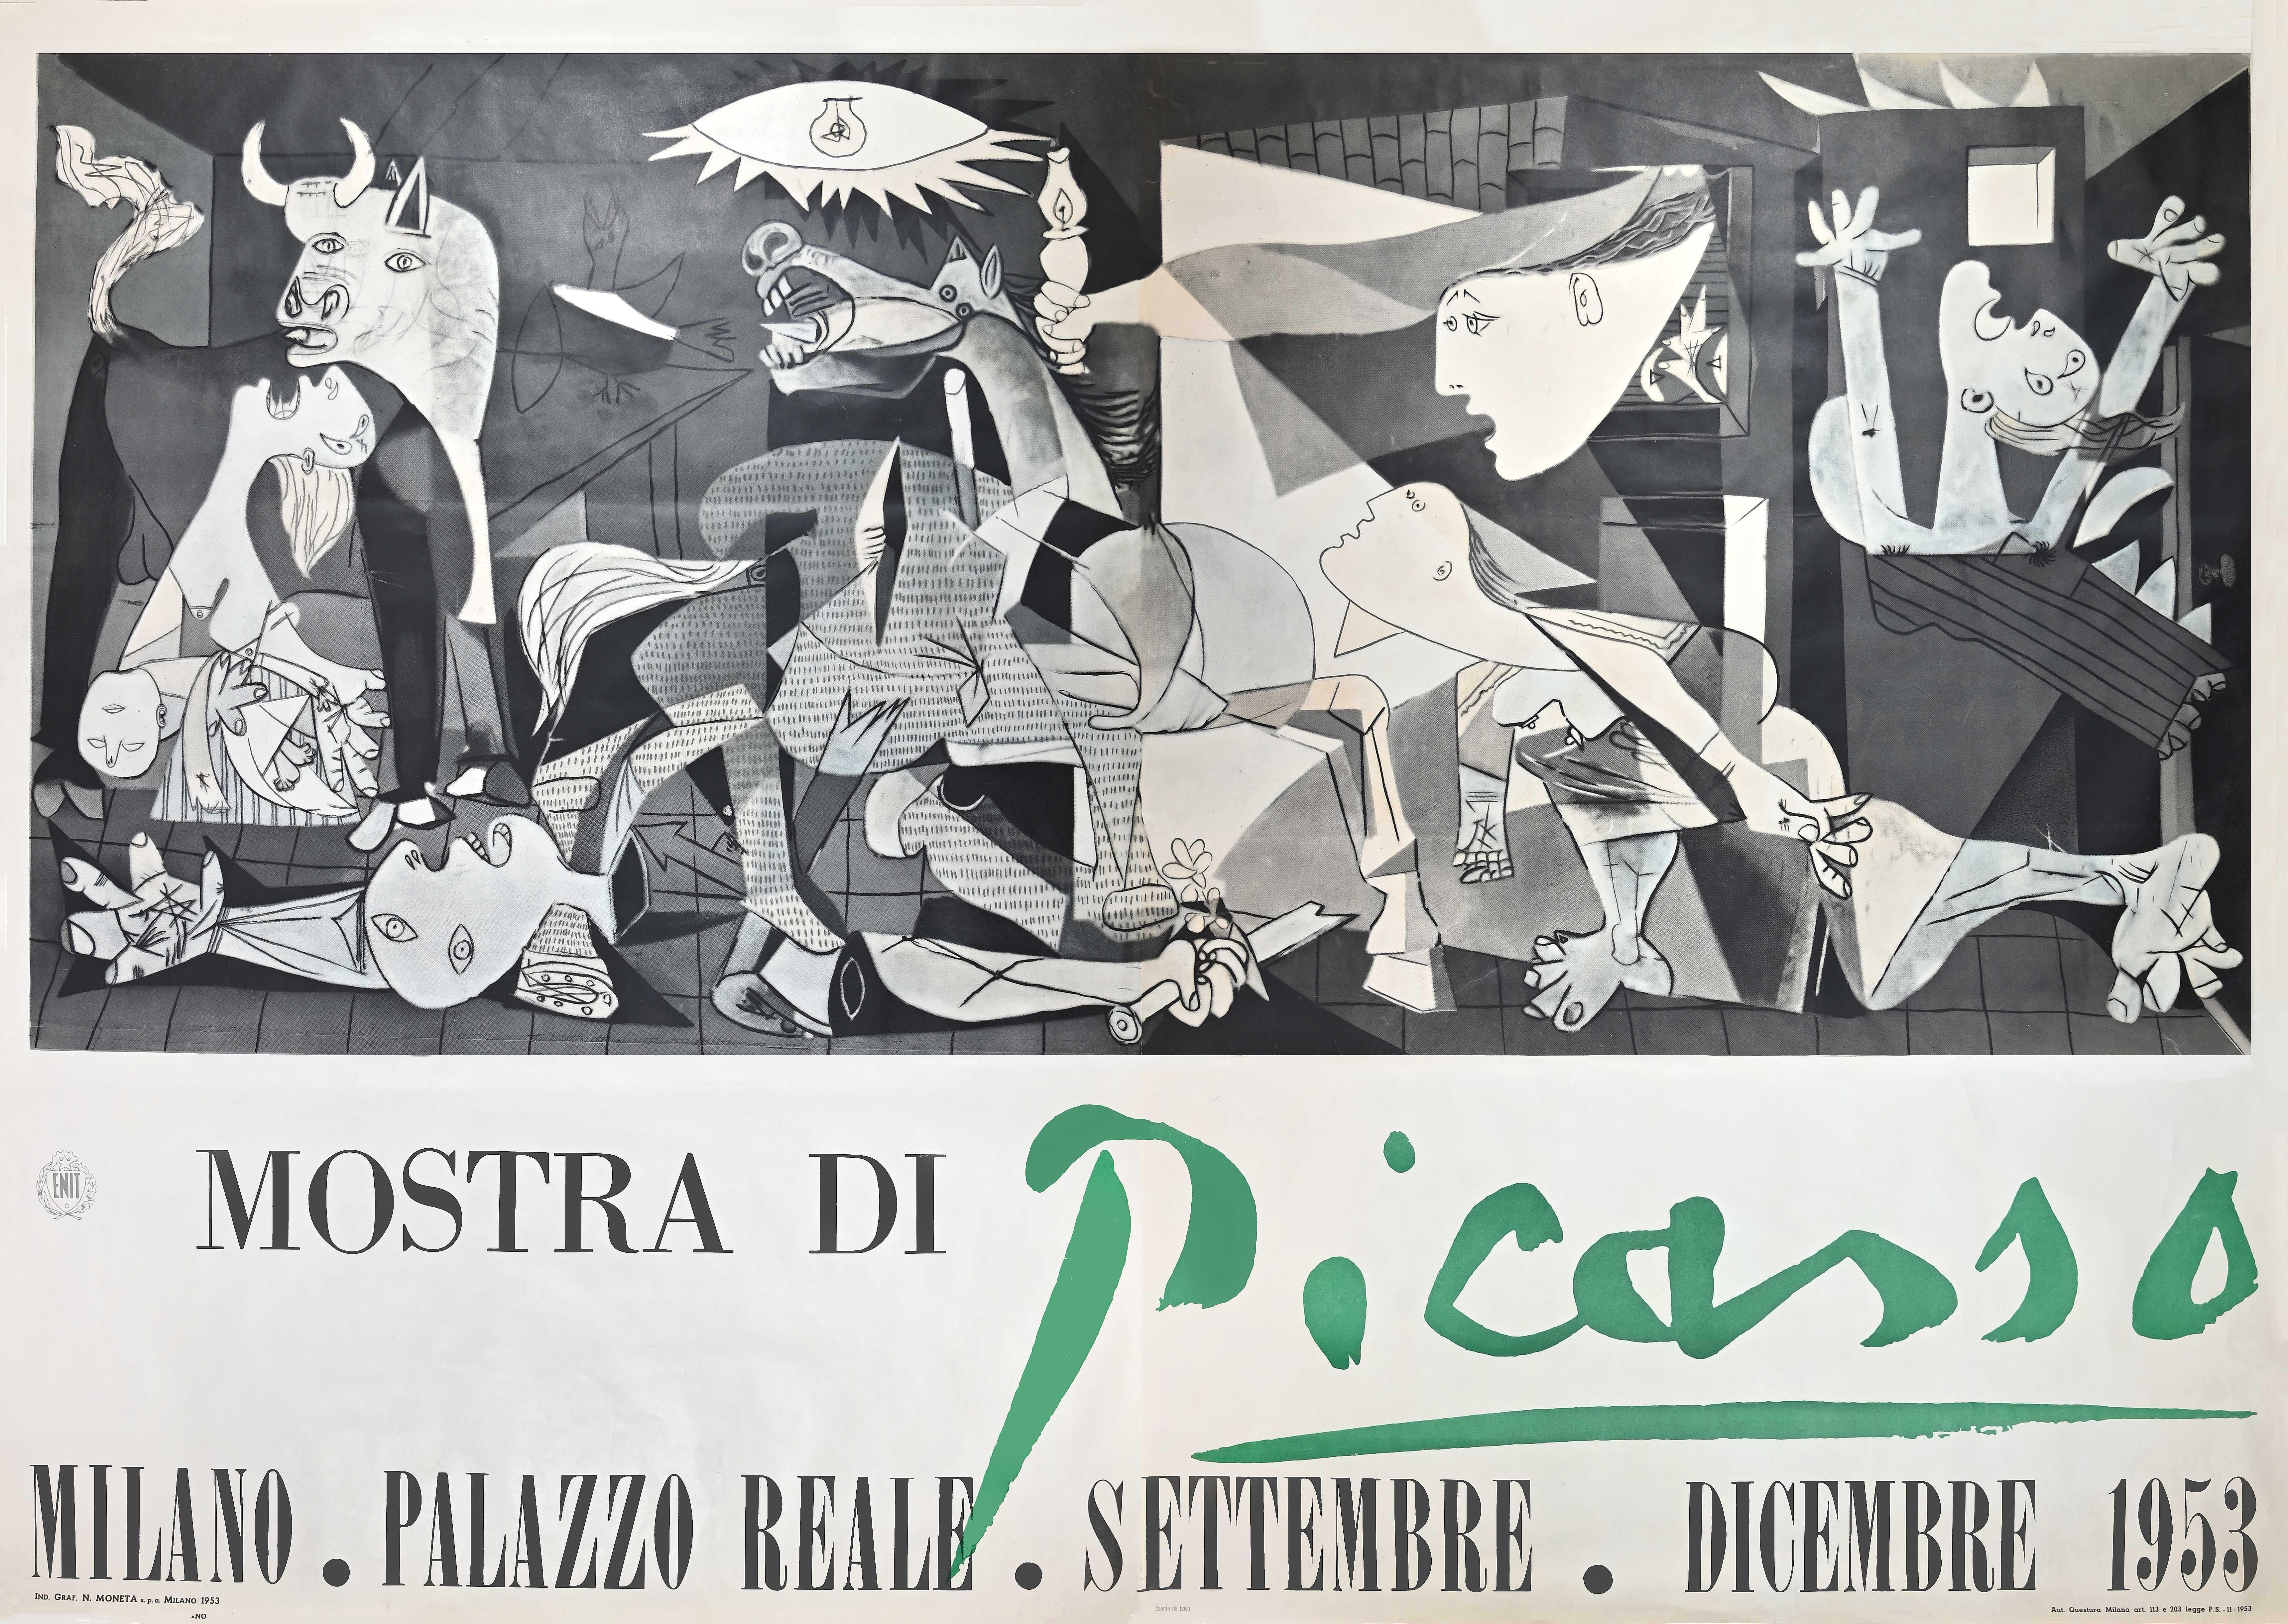 Pablo Picasso Print - Picasso Vintage Exhibition Poster, "Mostra di Picasso, " depicting Guernica -1953